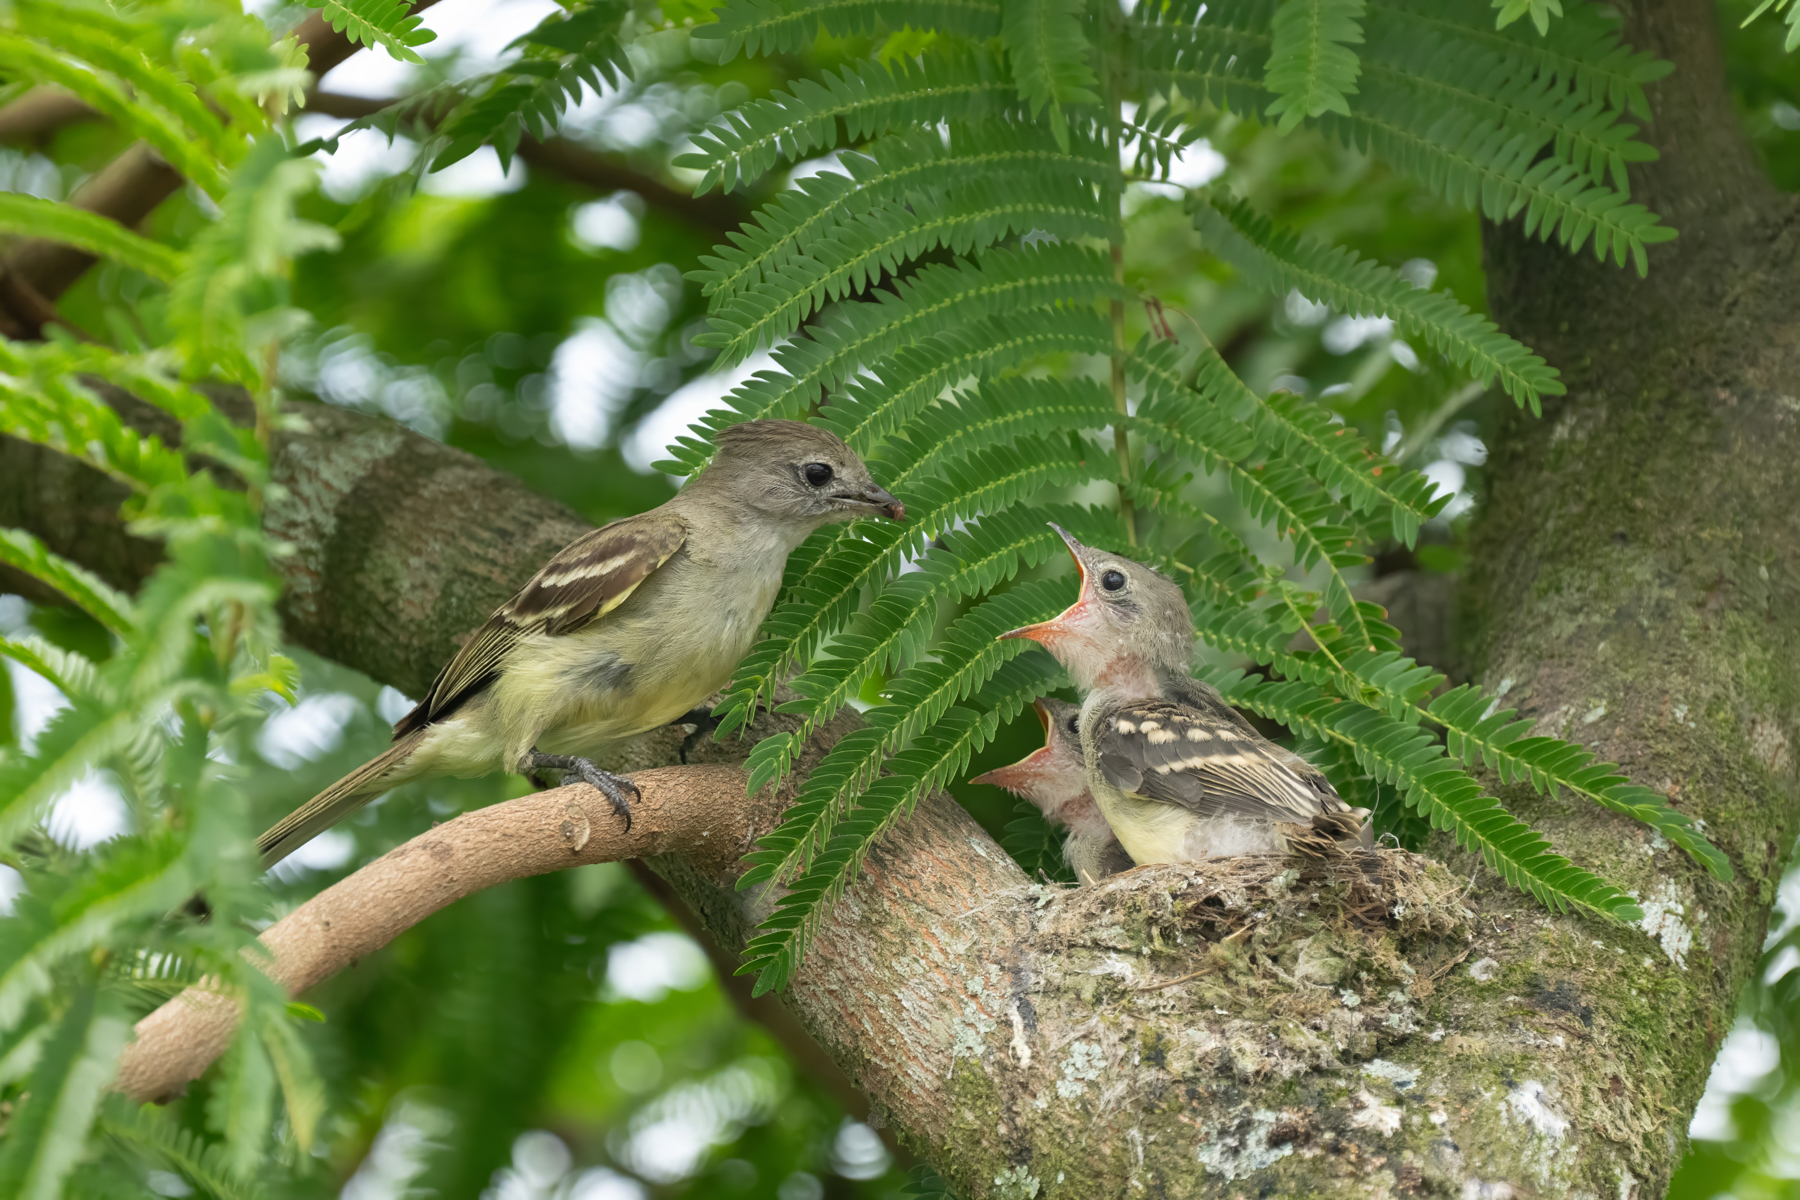 A Yellow-bellied Elaenia bringing insect food to its chicks on the nest in a school ground of all places! (image by Inger Vandyke)